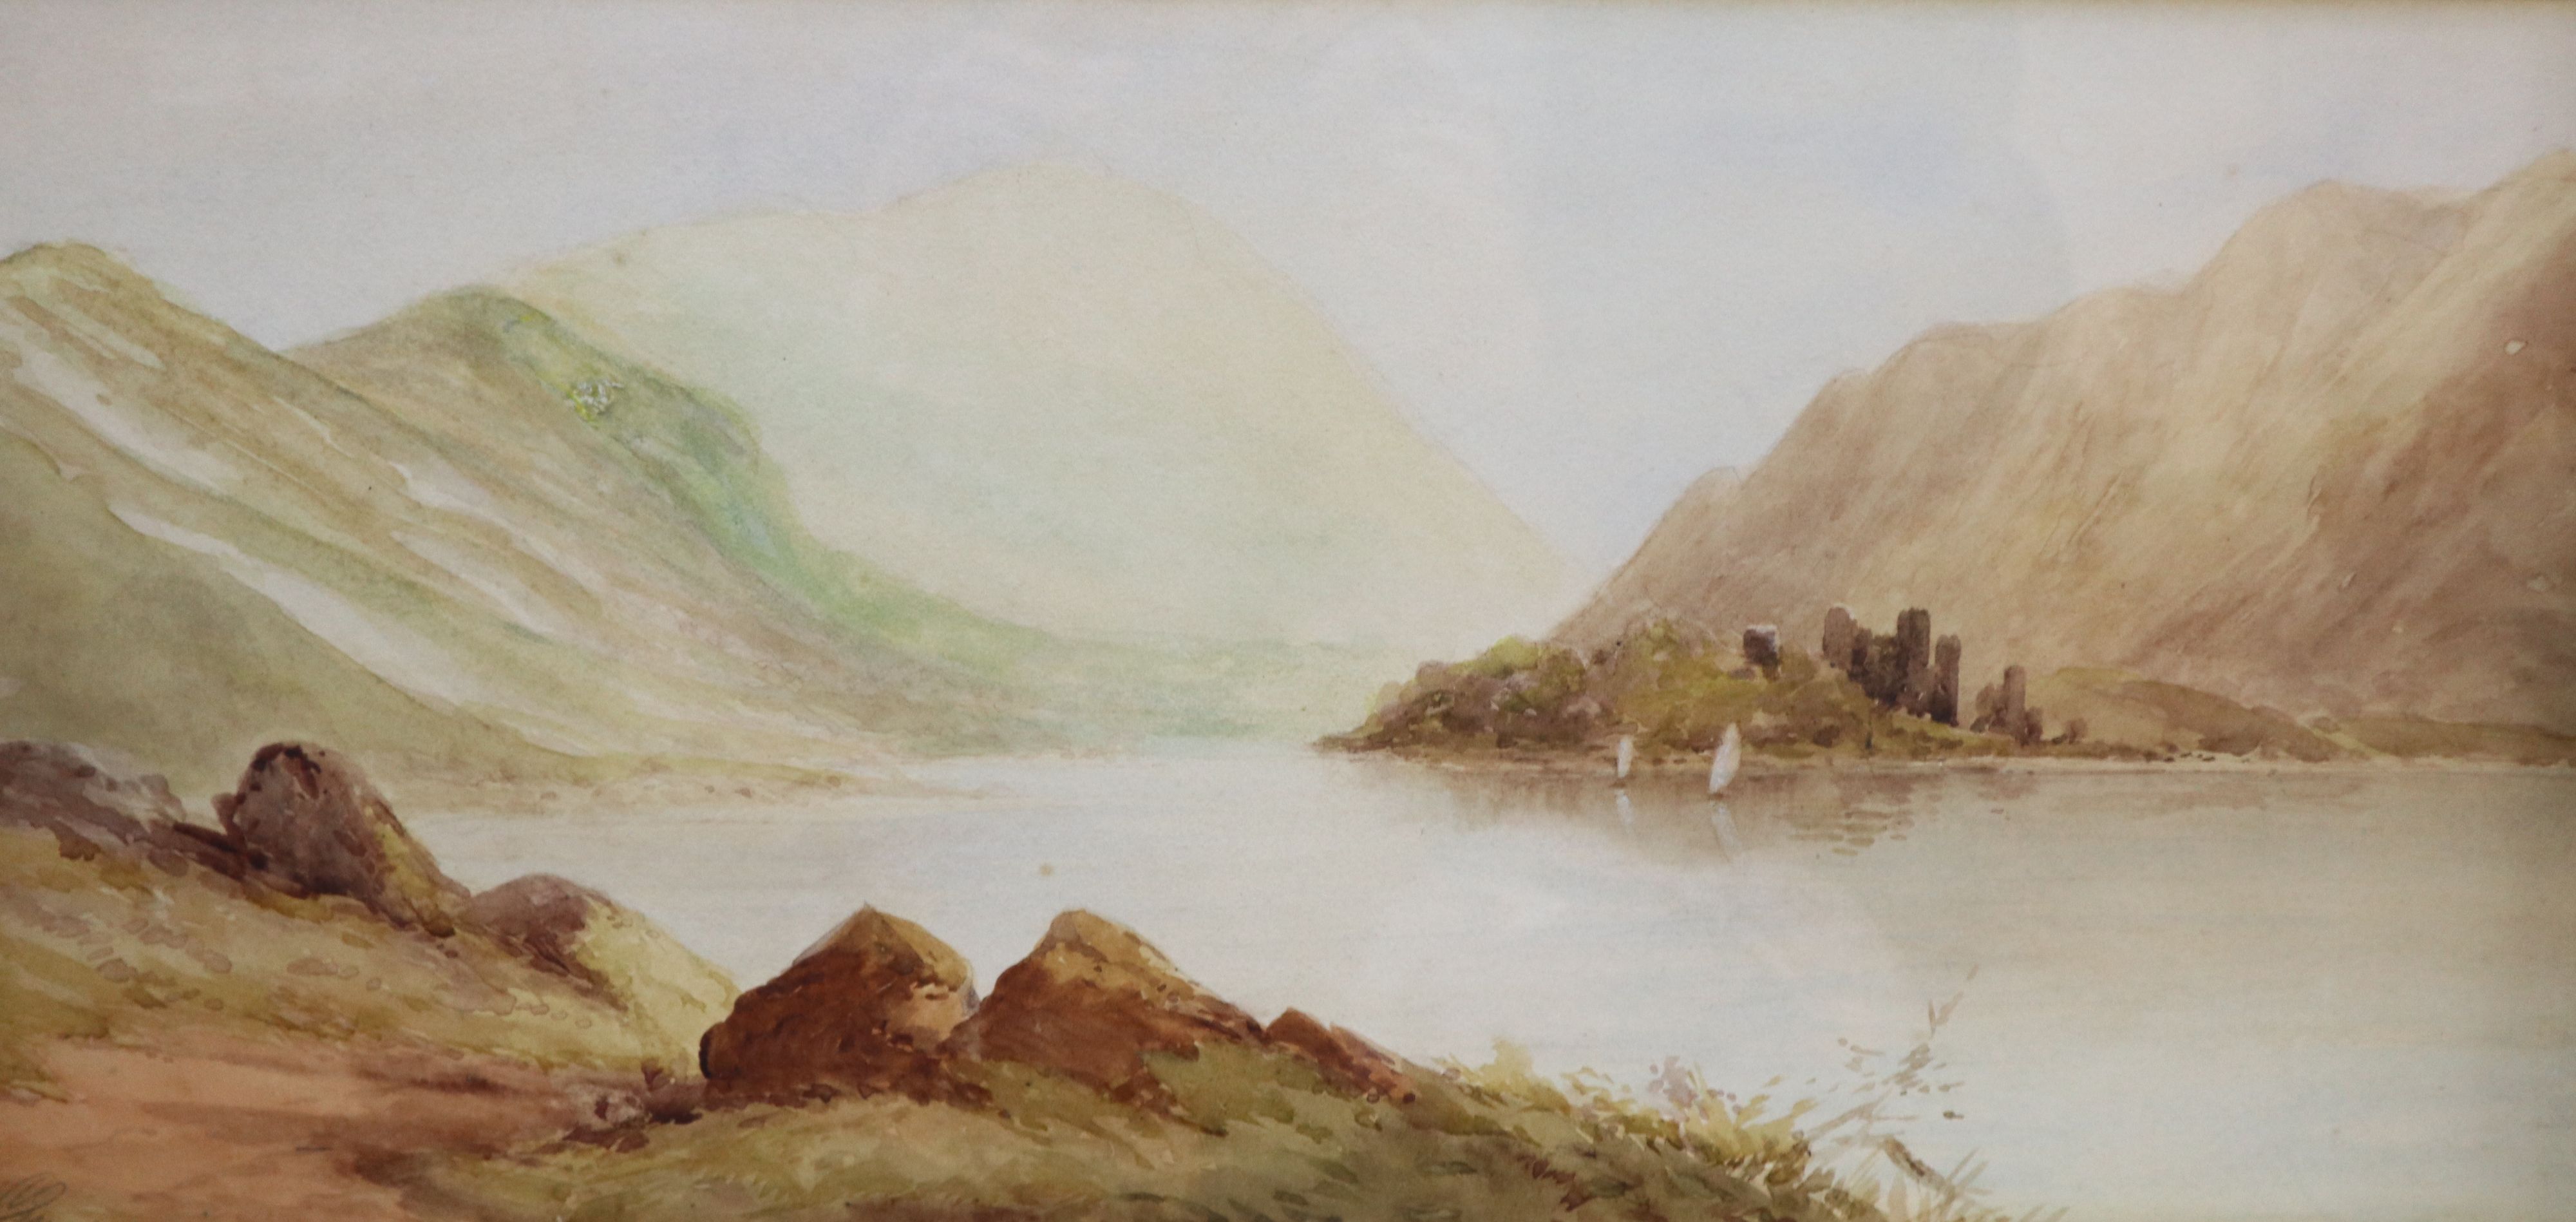 G. E. Lees, River landscapes with cottages, watercolour, a pair, 23 x 33cm and sundry pictures